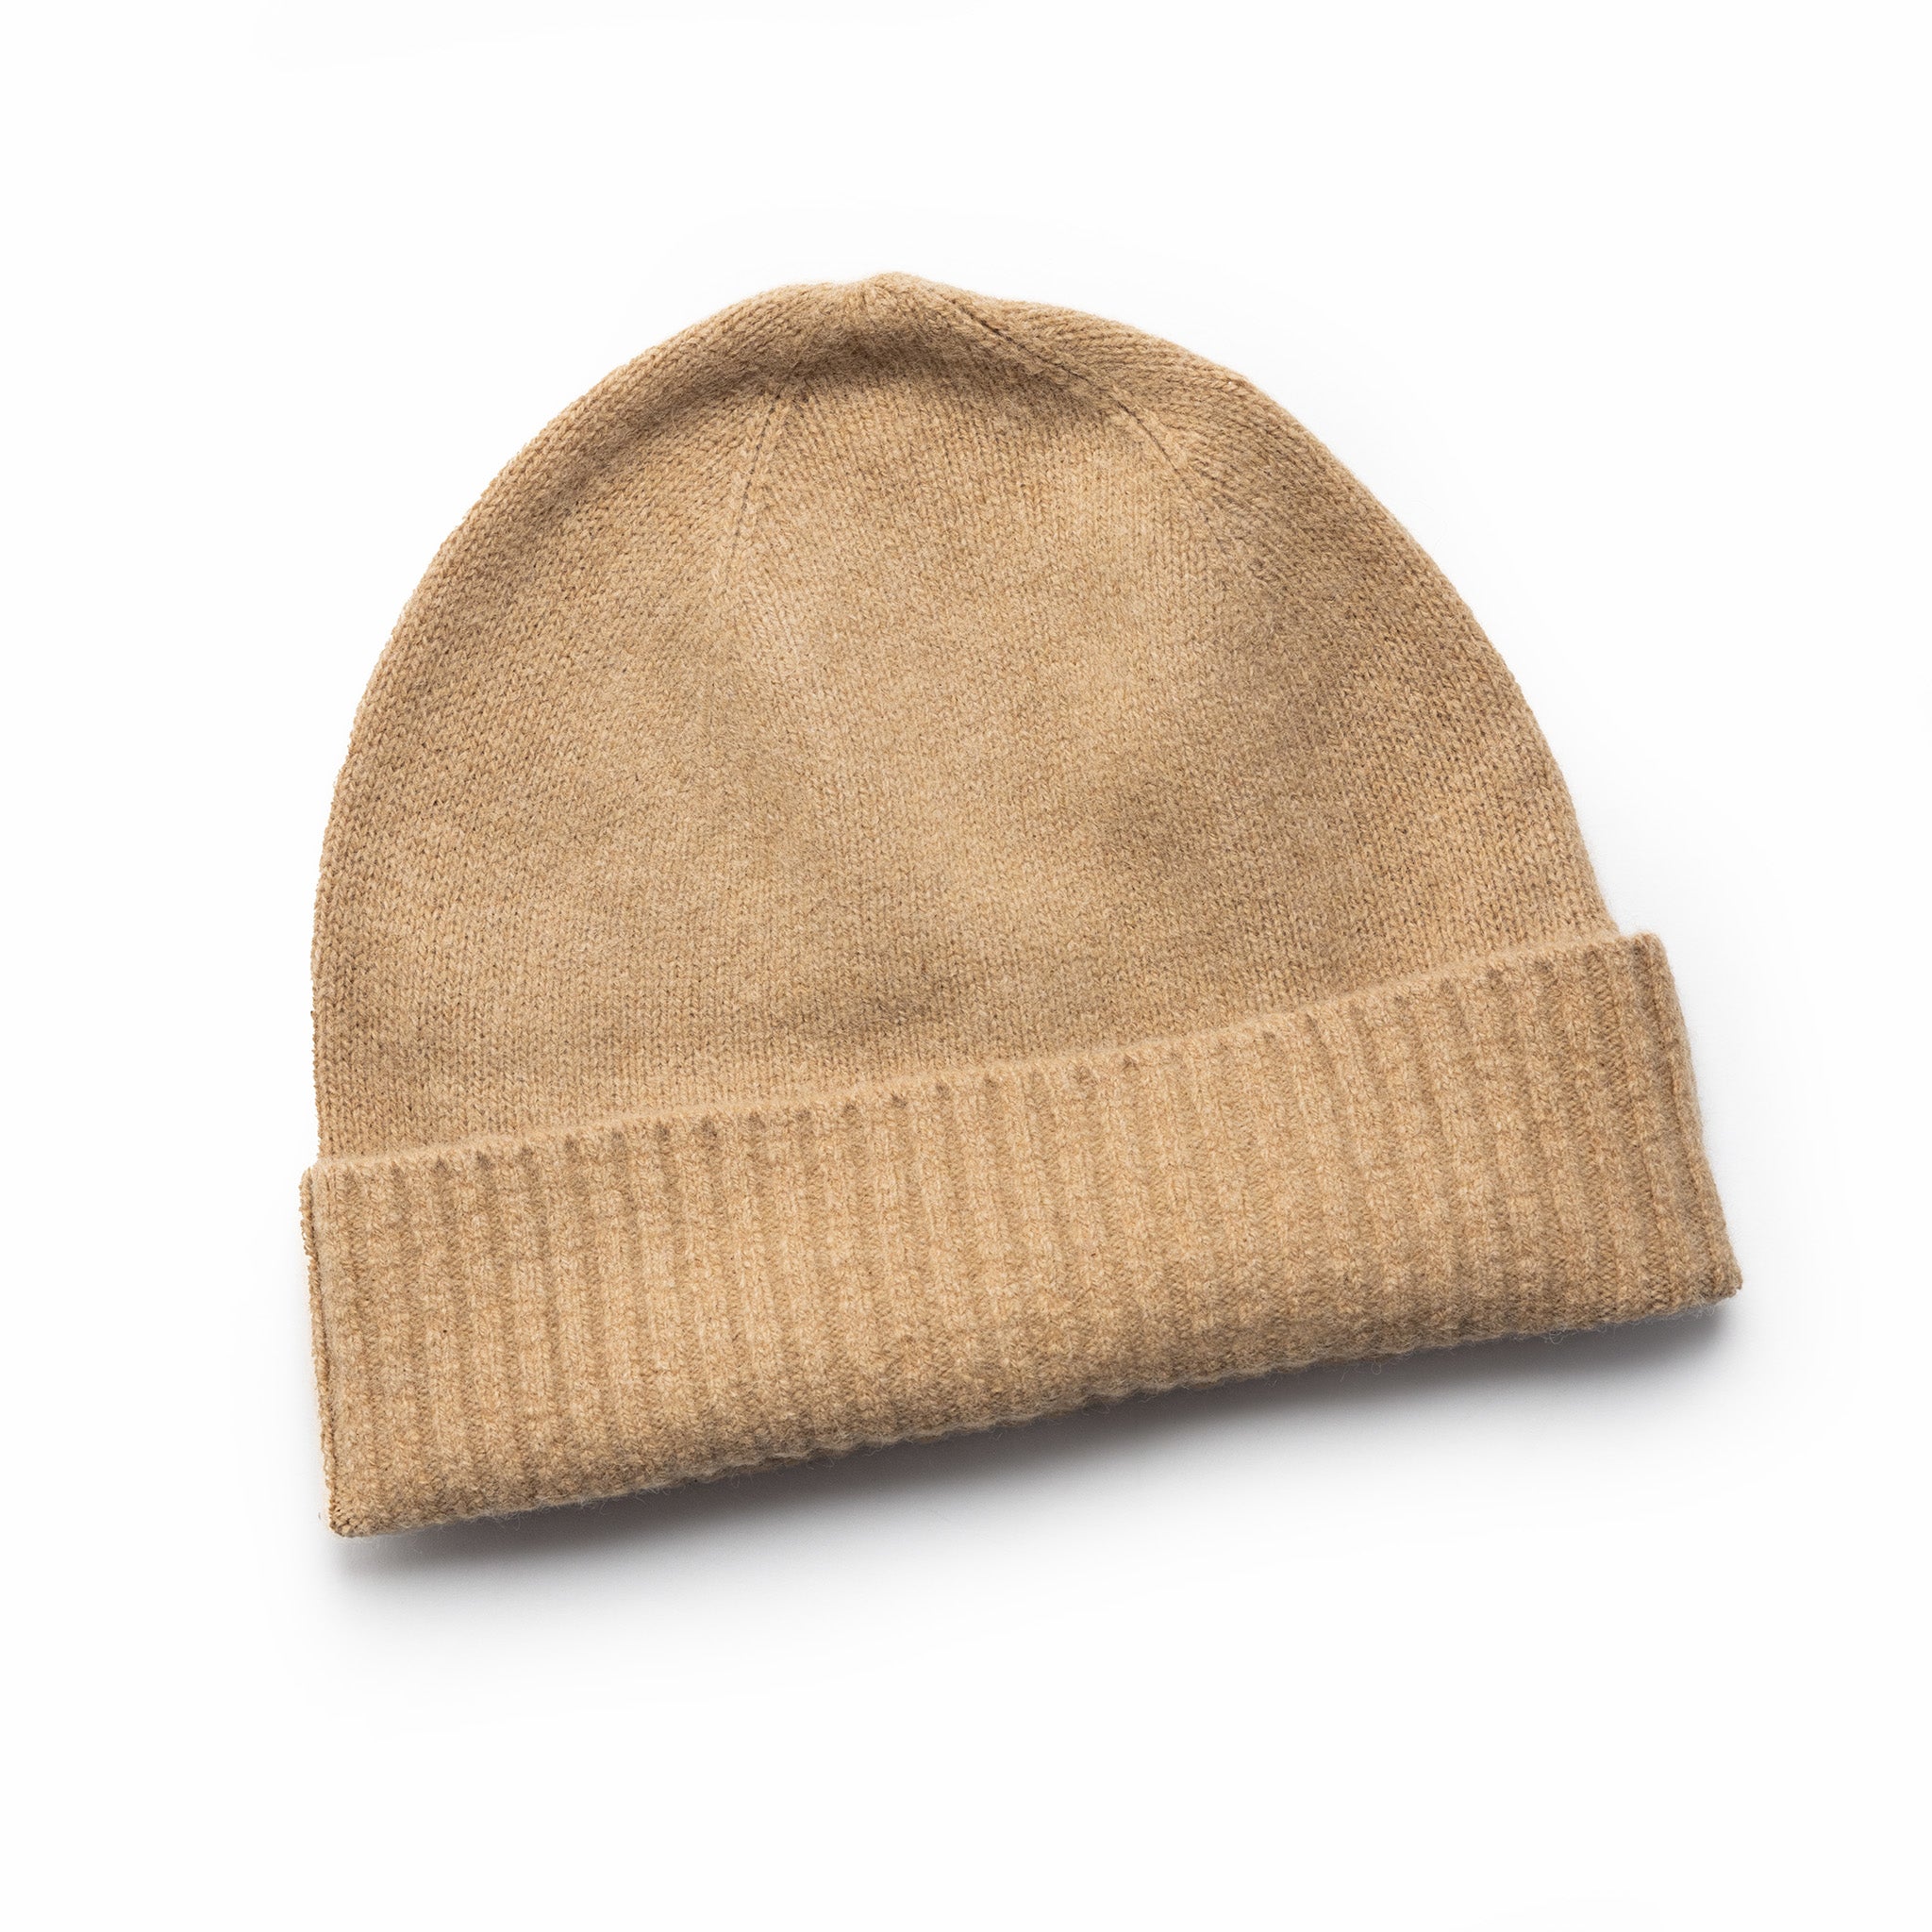 The Lodge Beanie in Camel